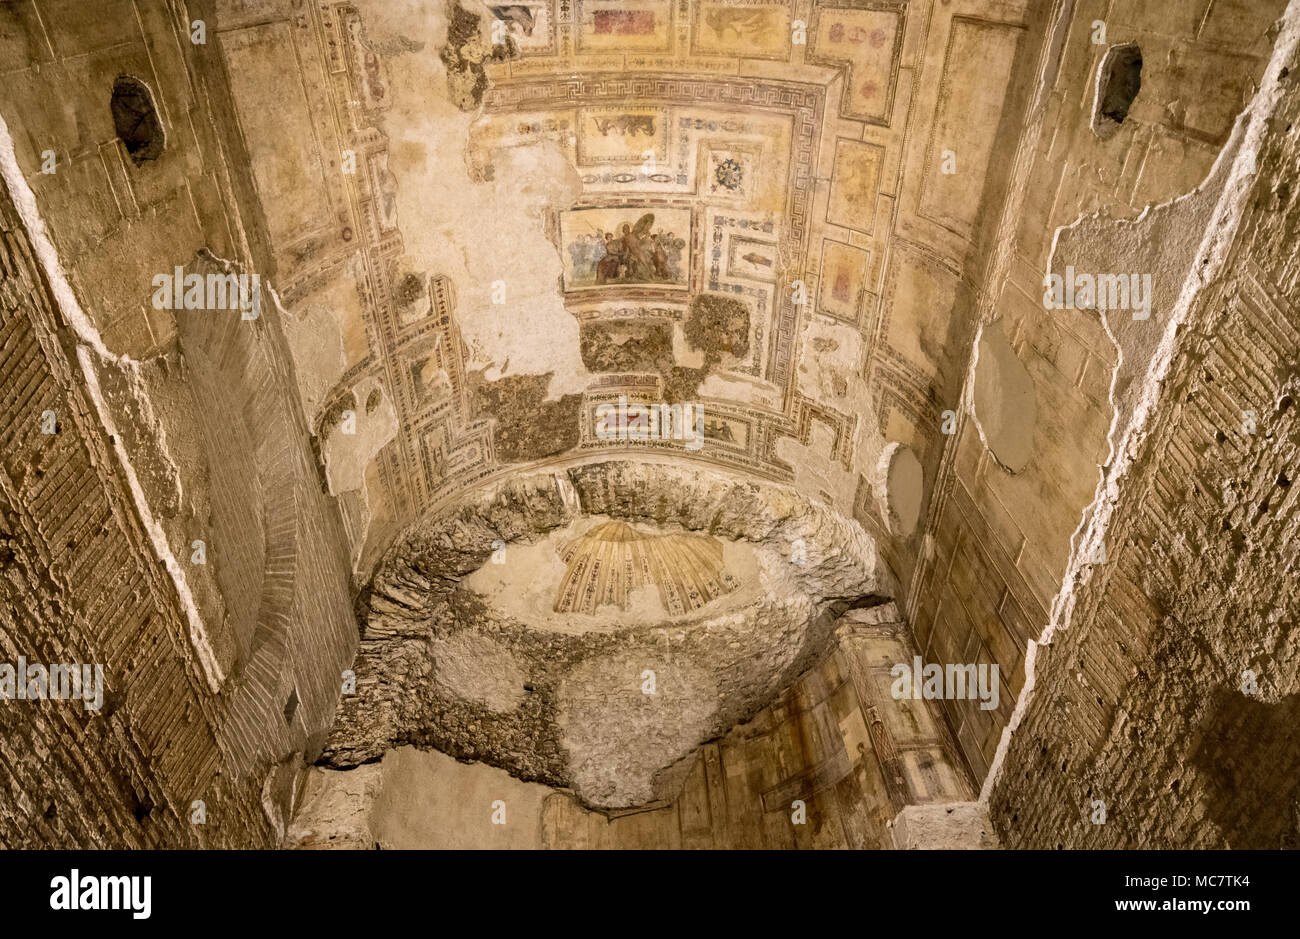 Remains of wall murals inside Domus Aurea in Rome Stock Photo